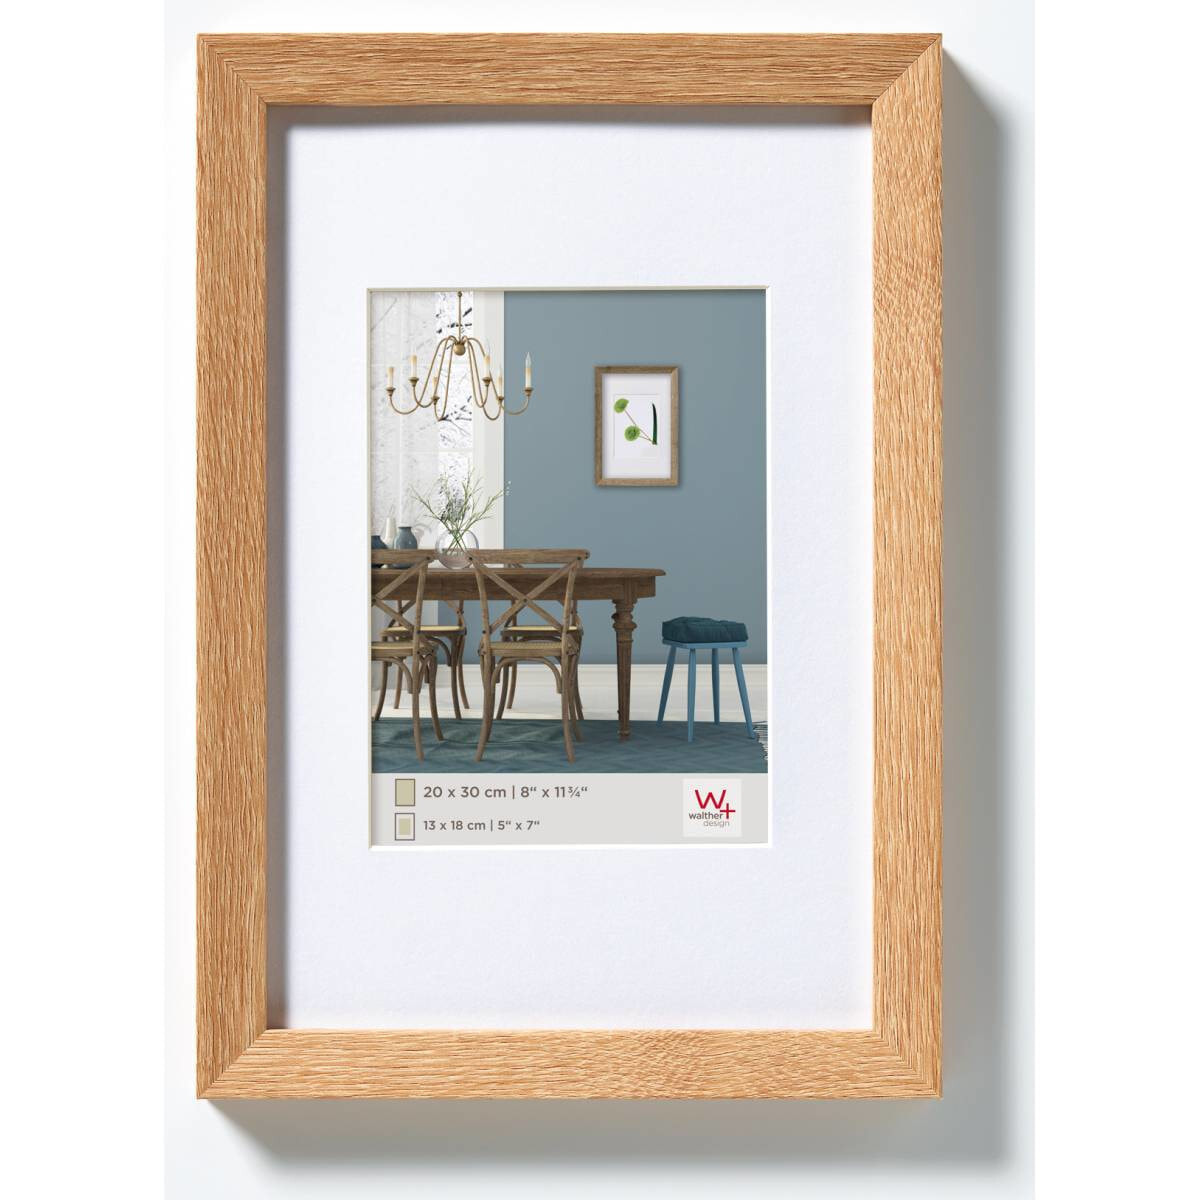 Walther EF520E - MDF - Oak - Single picture frame - Wall - 10 x 15 cm - Rectangular